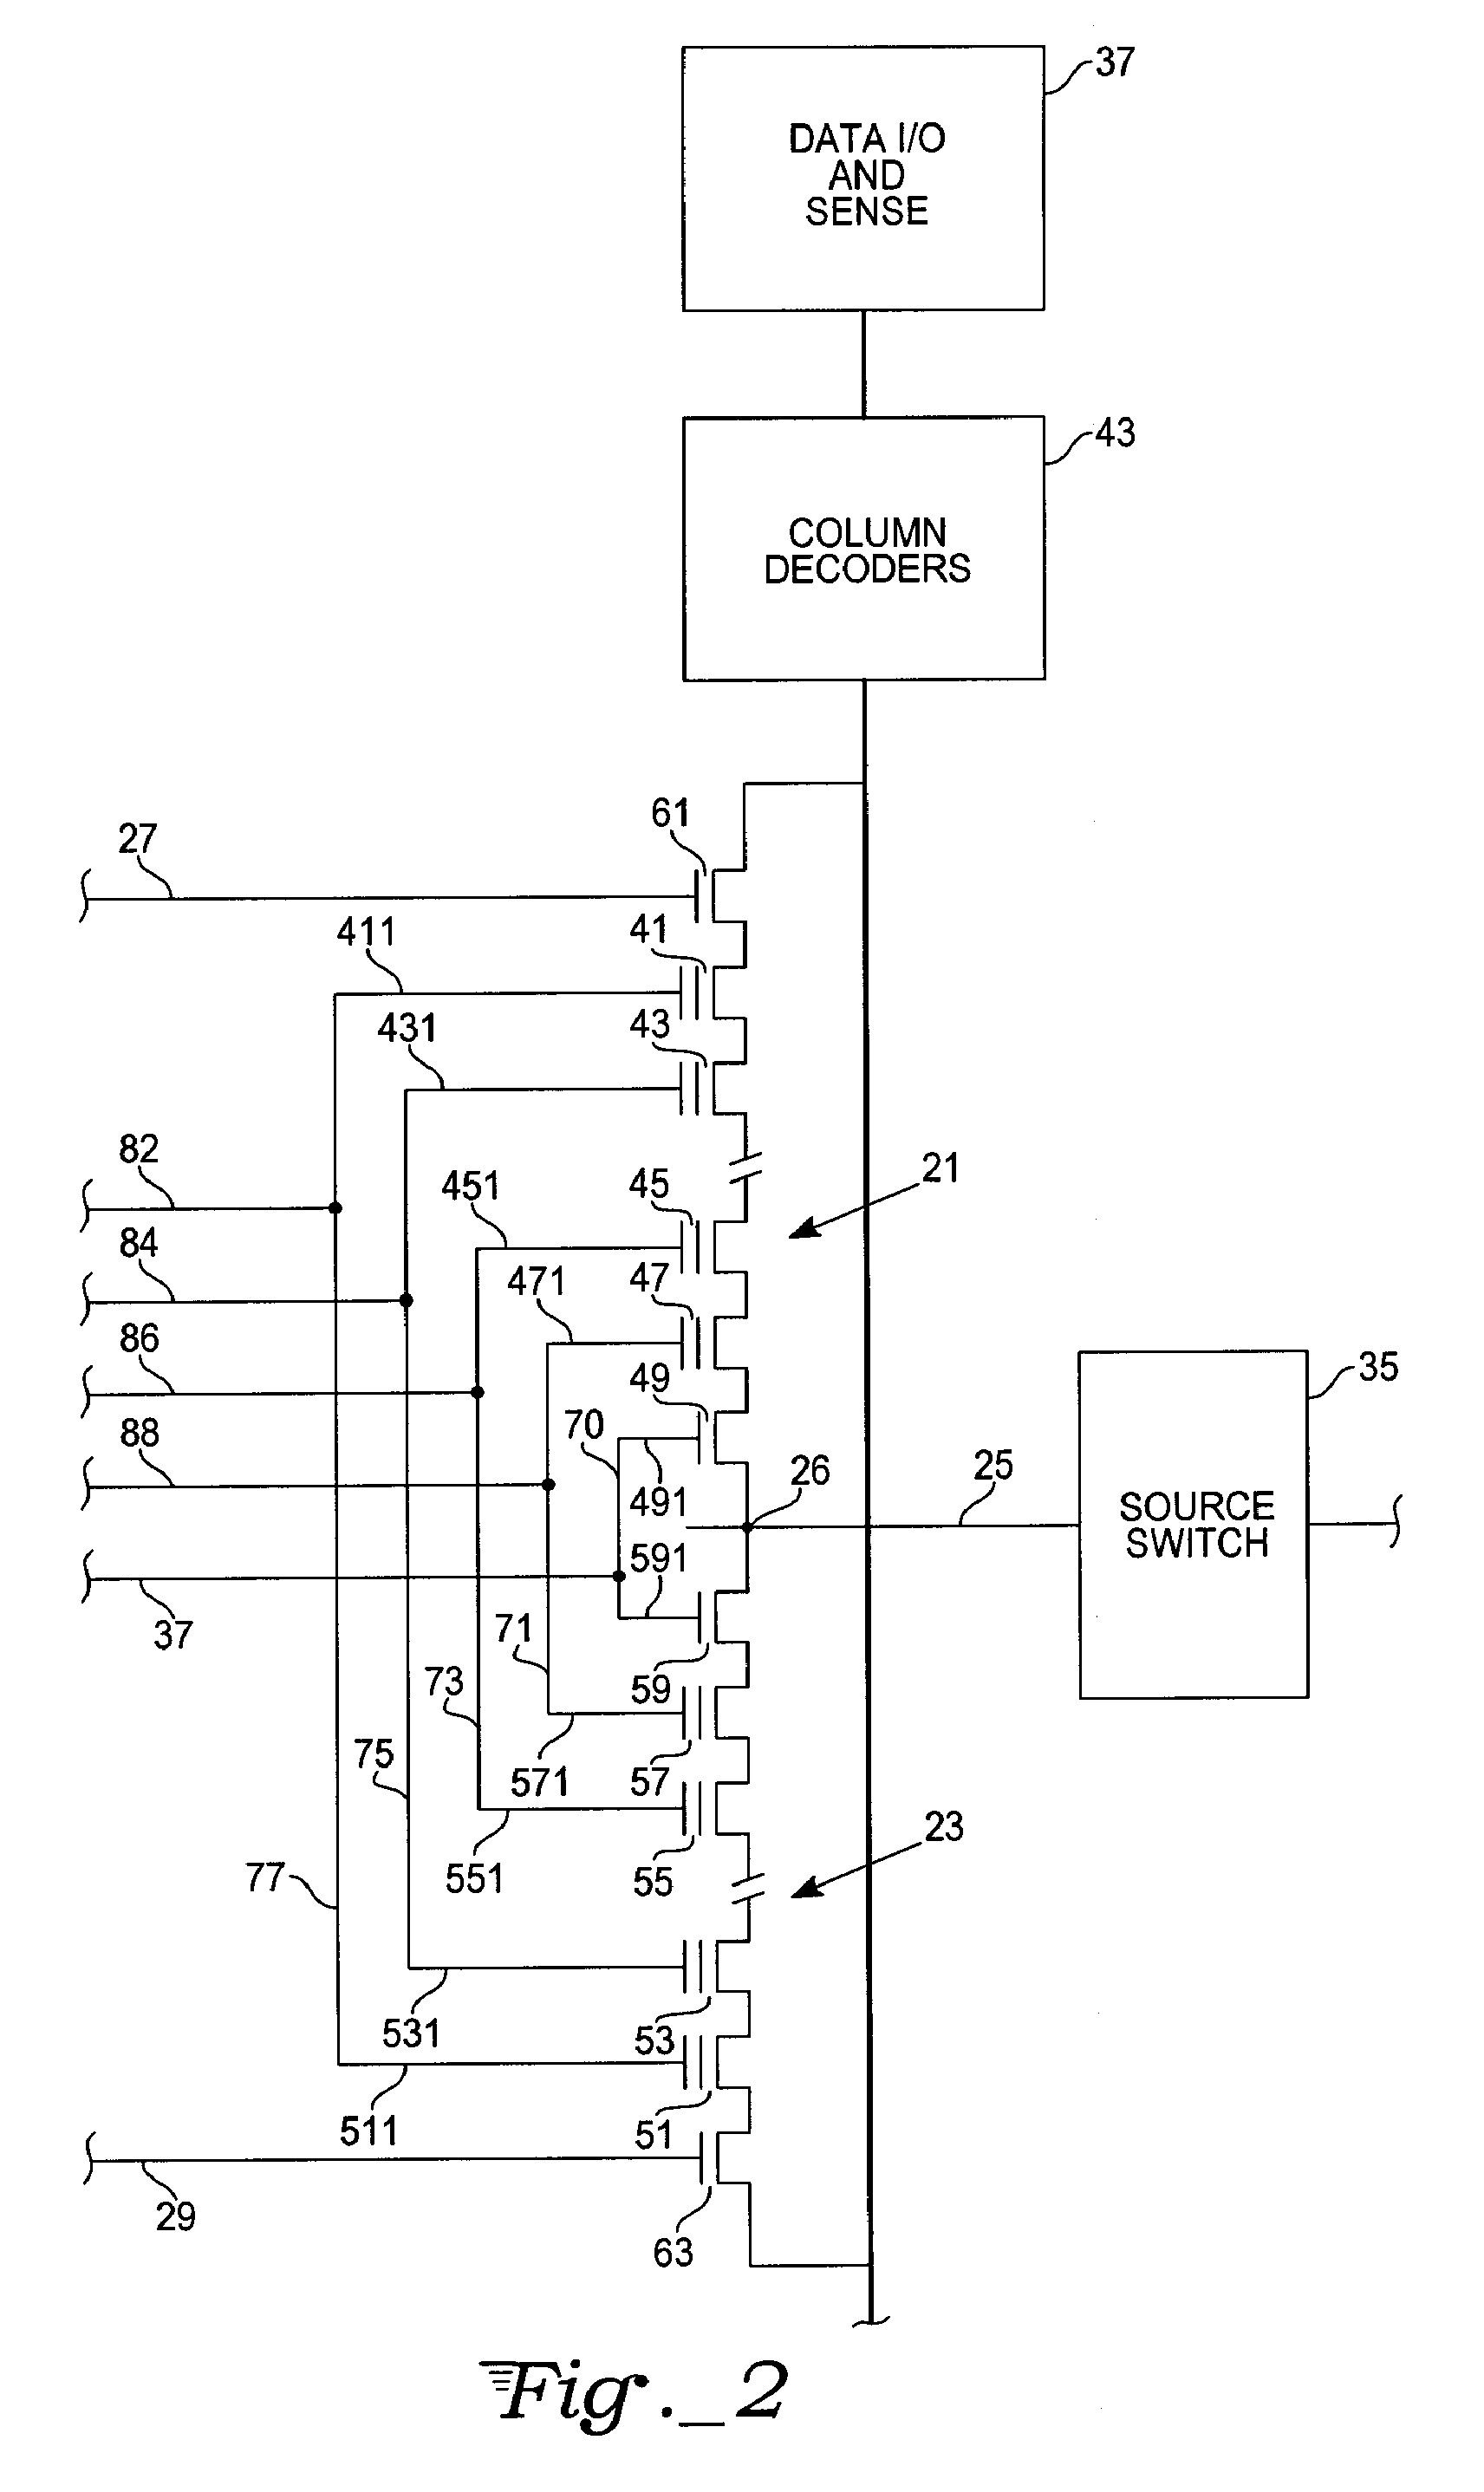 Non-volatile memory array architecture with joined word lines